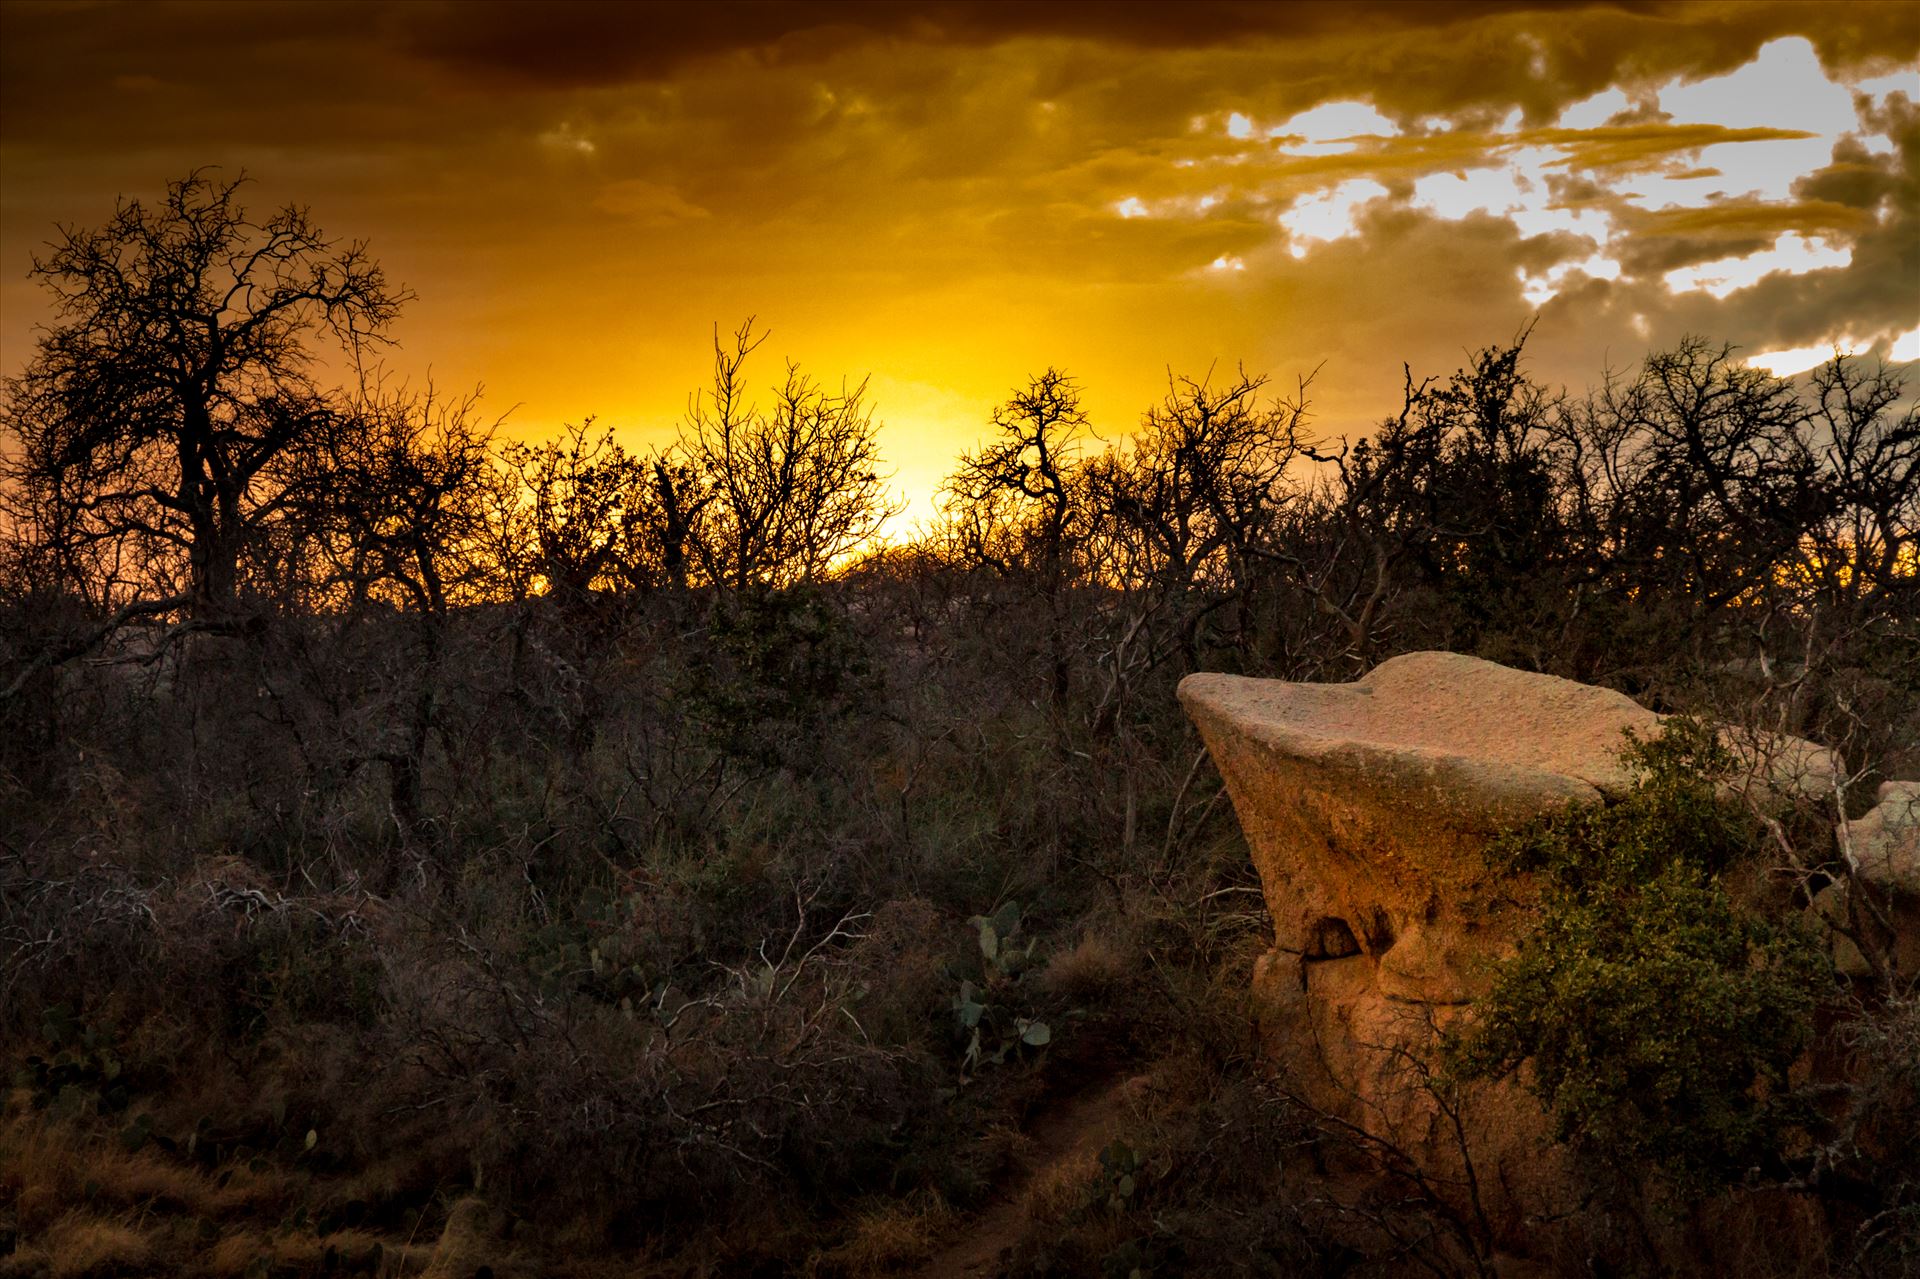 20140112-Enchanted Rock-DSLR-064.jpg  by Charles Smith Photography